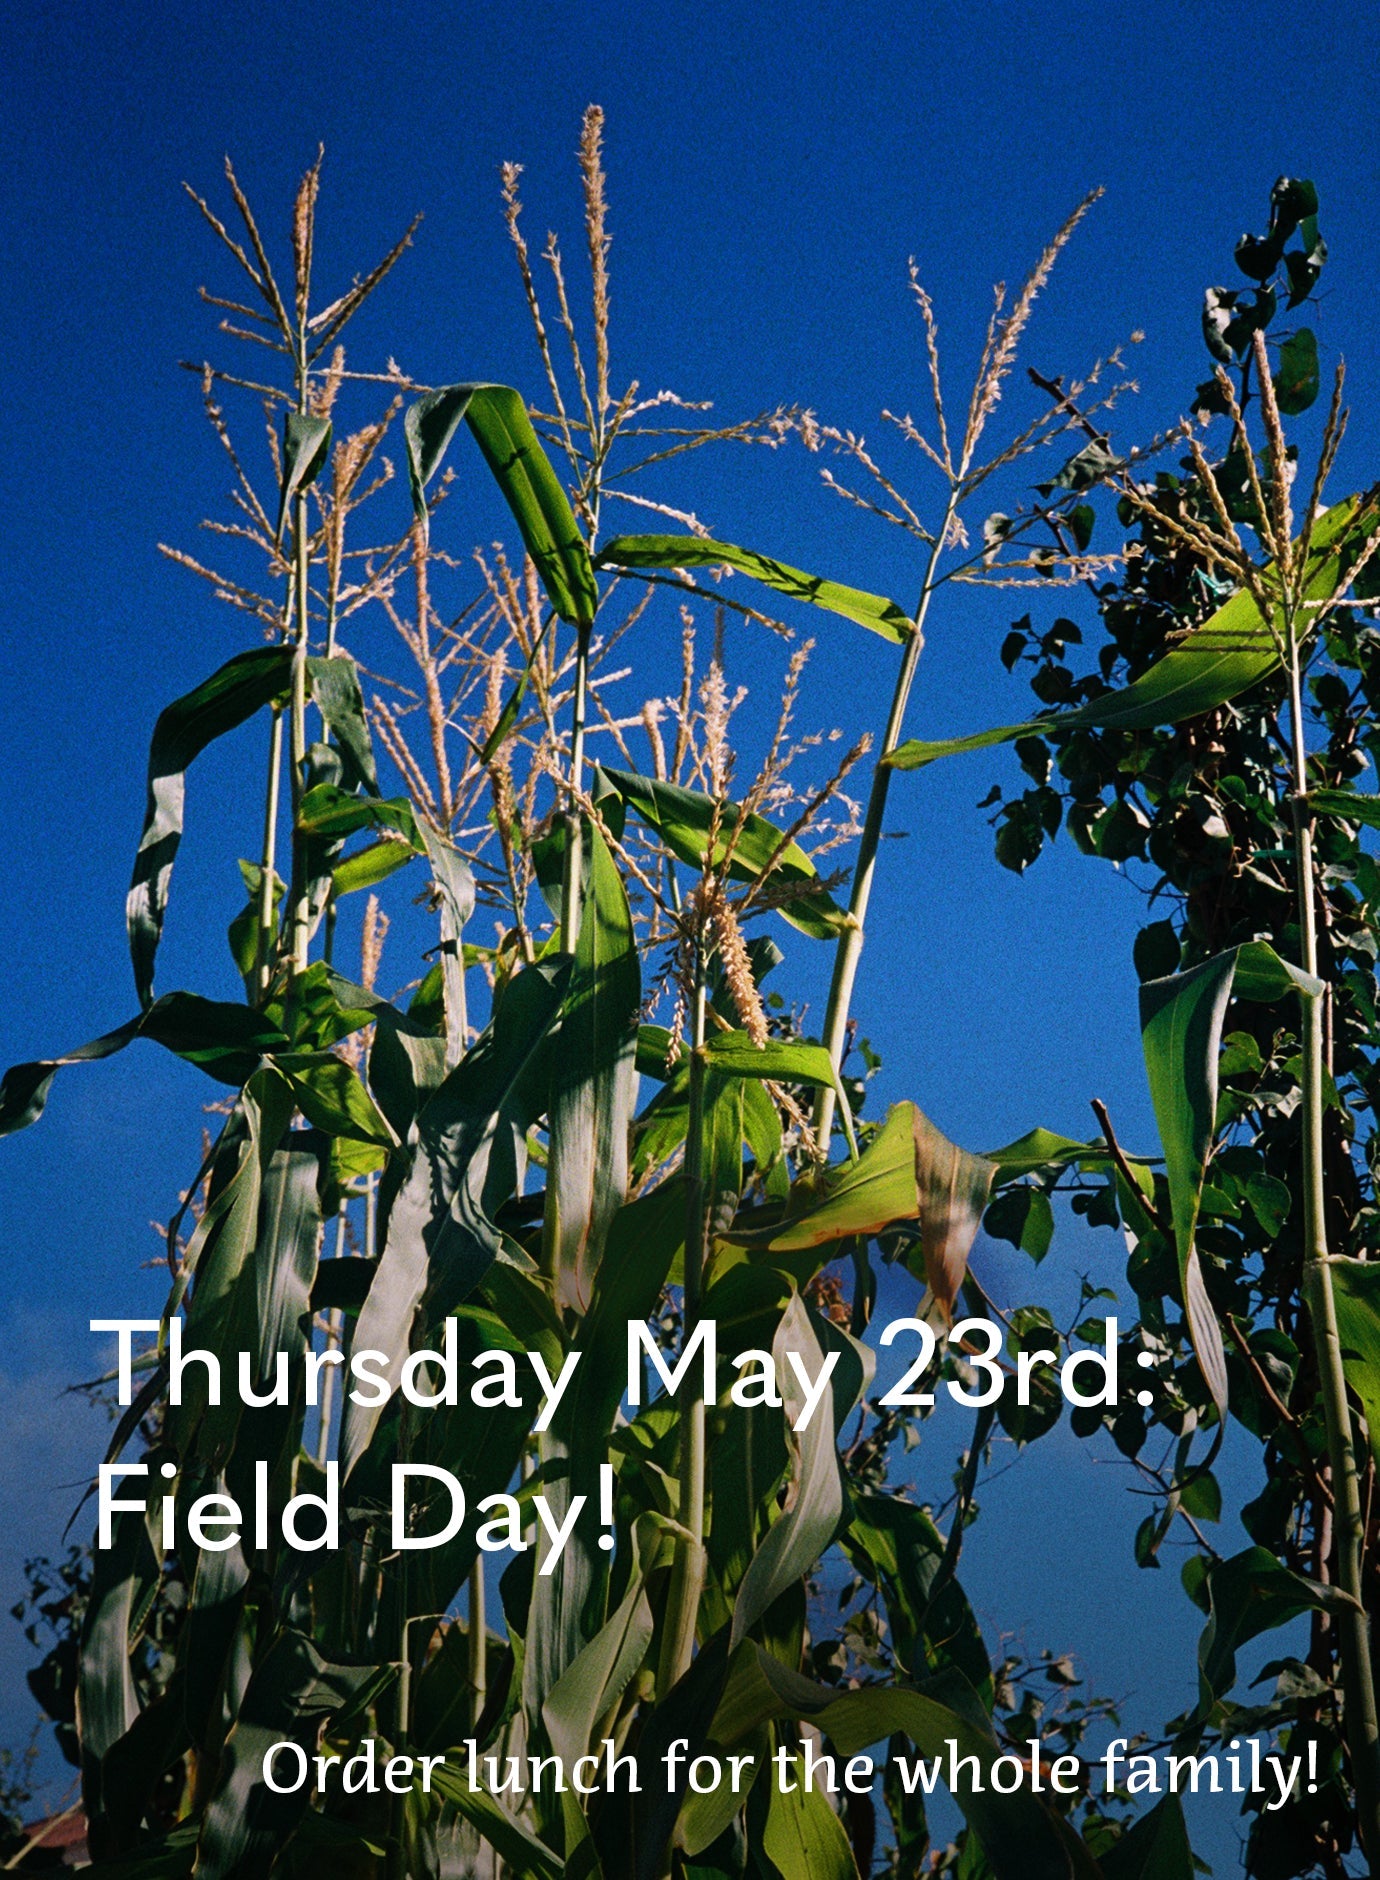 Thu May 23rd - FIELD DAY